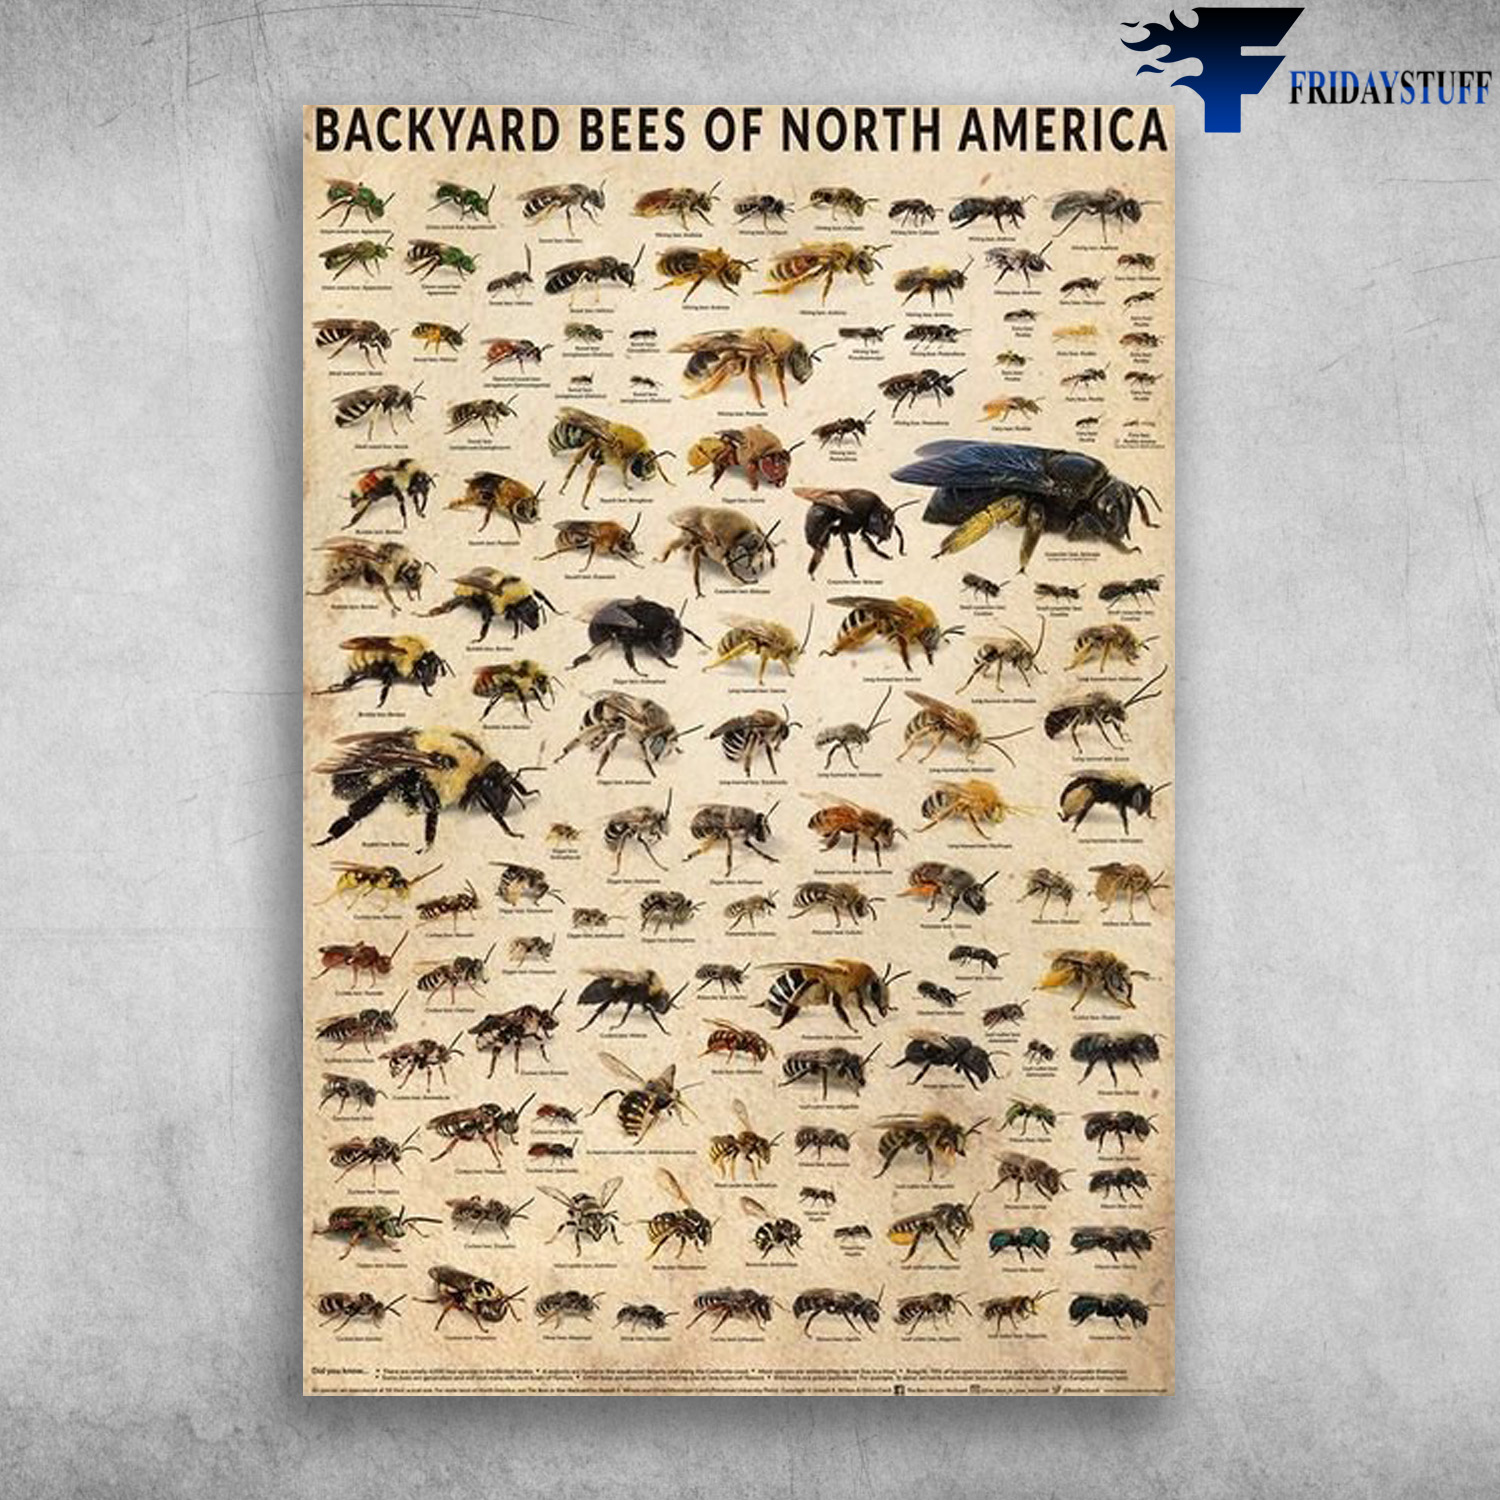 Backyard Bees Of North America, Types Of Bees In North AmericaBackyard Bees Of North America, Types Of Bees In North America